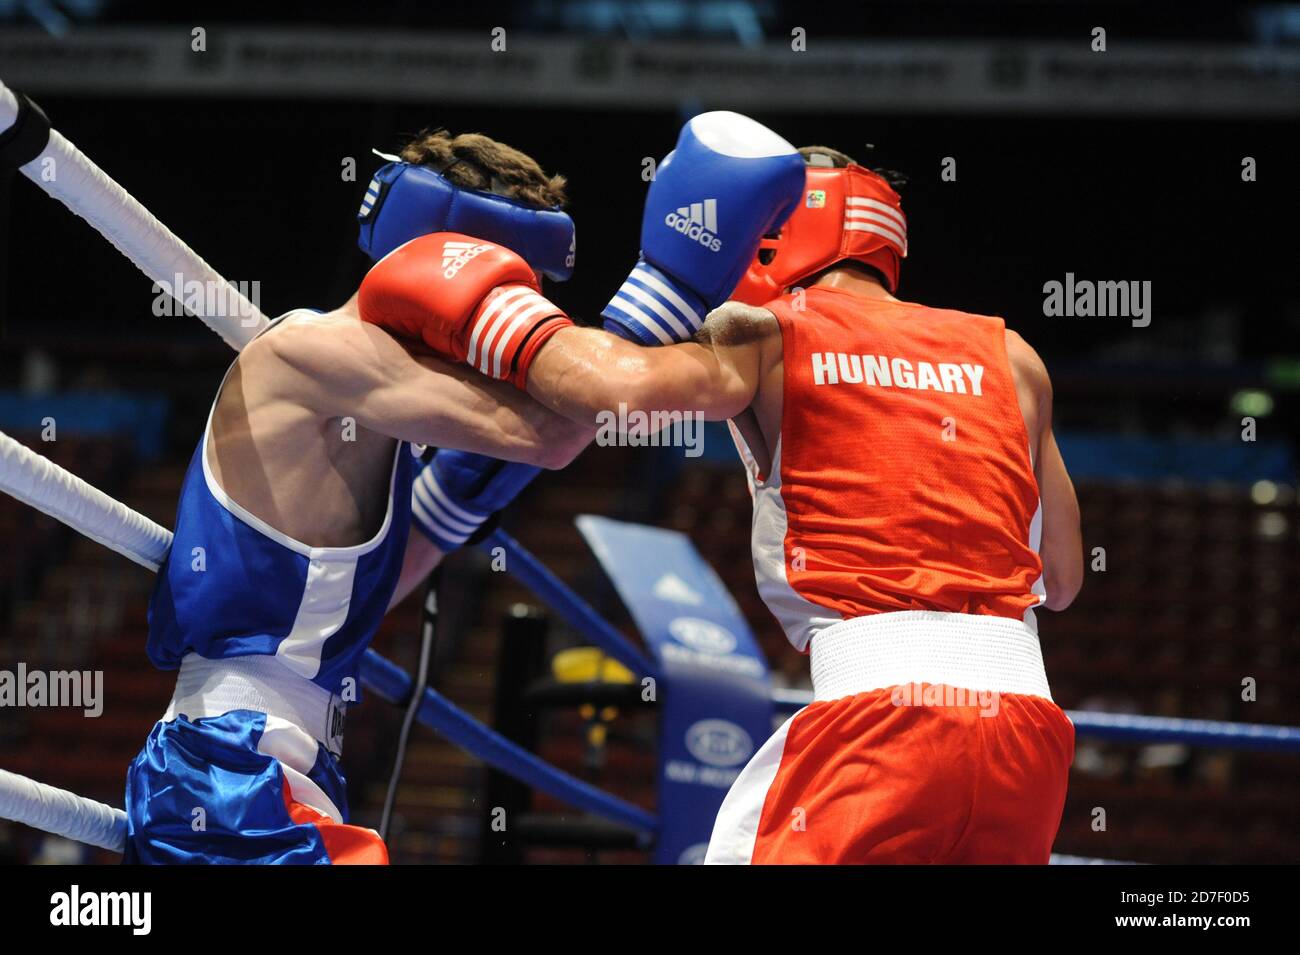 Boxers fighting during an amateur boxing match during the AIBA World Boxing Champioship in Milan 2009. Stock Photo